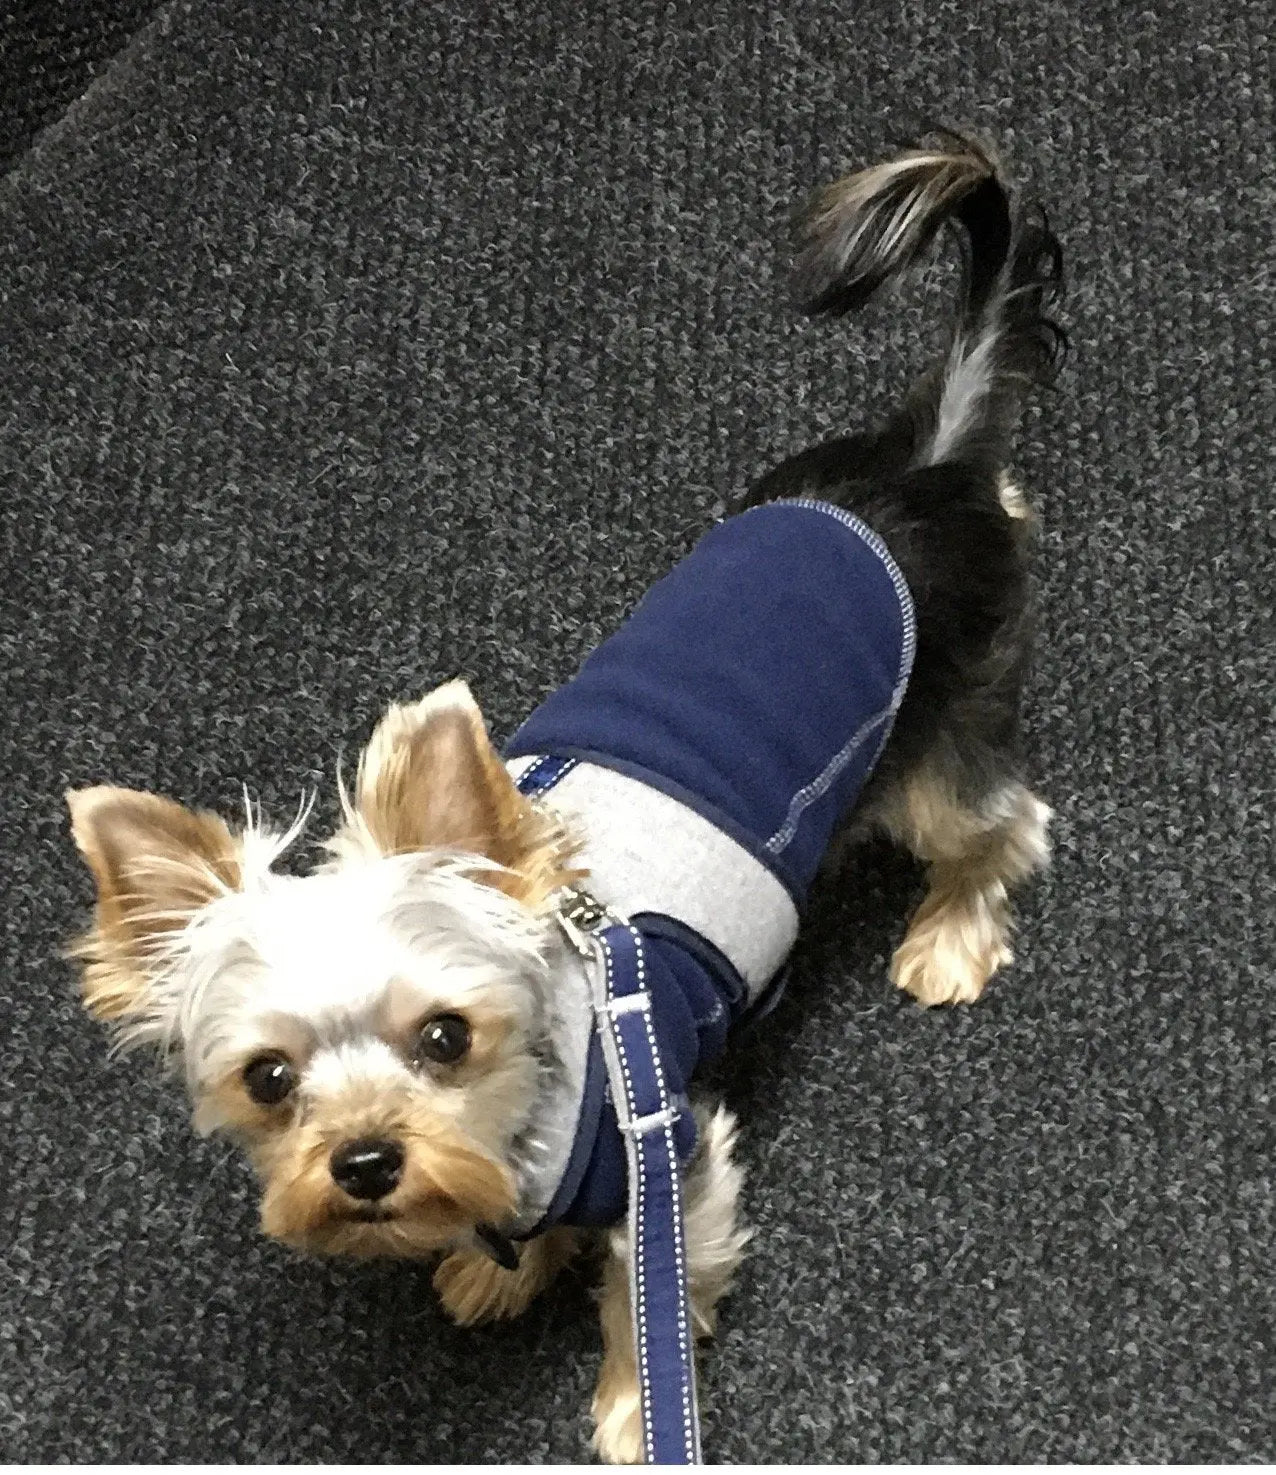 Teacup dog wearing sweater and flannel harness set